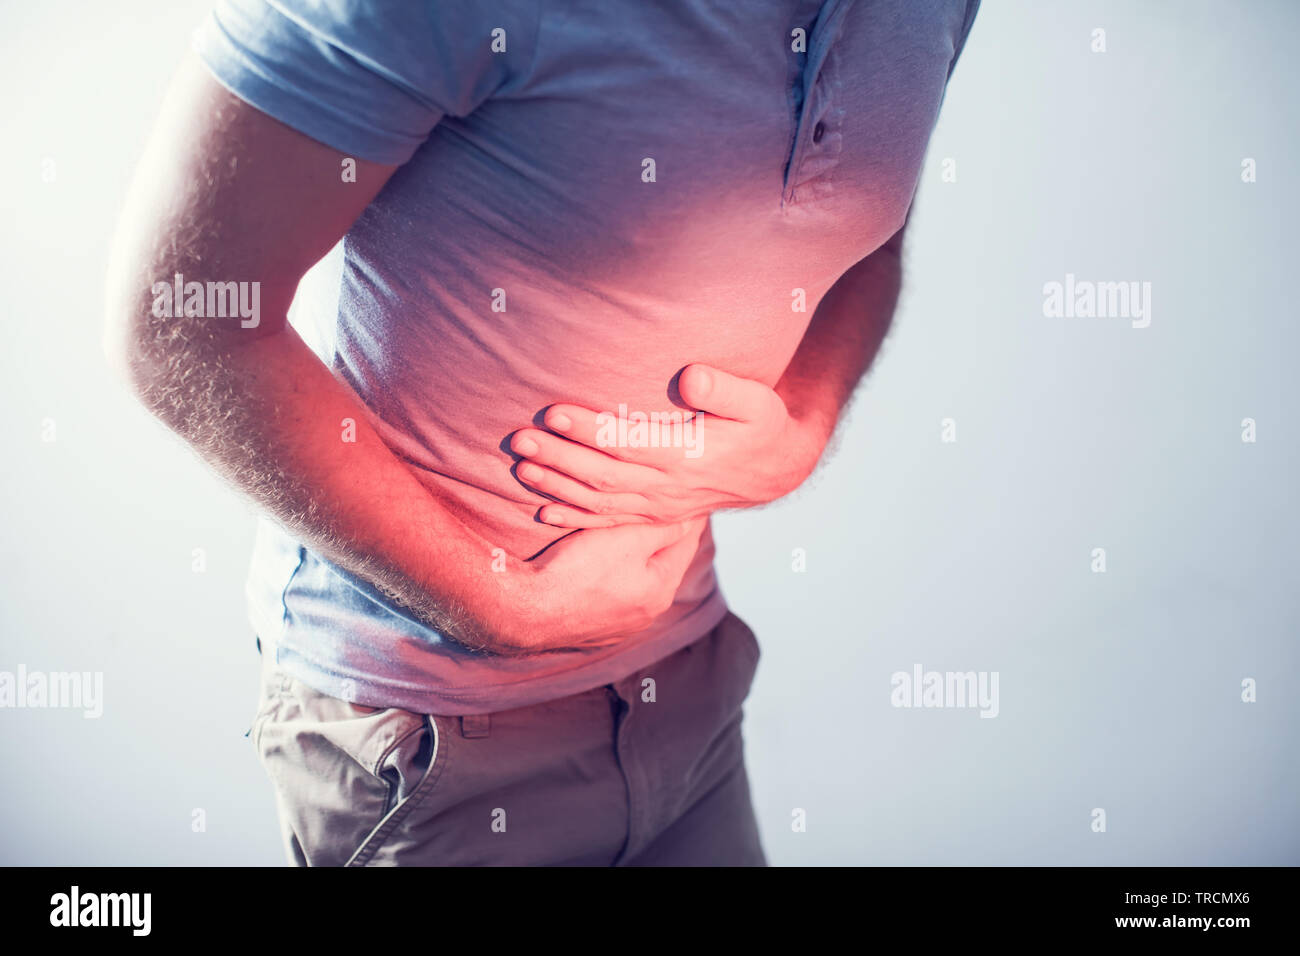 People, healthcare and problem concept - unhappy man suffering from stomach ache over gray background Stock Photo